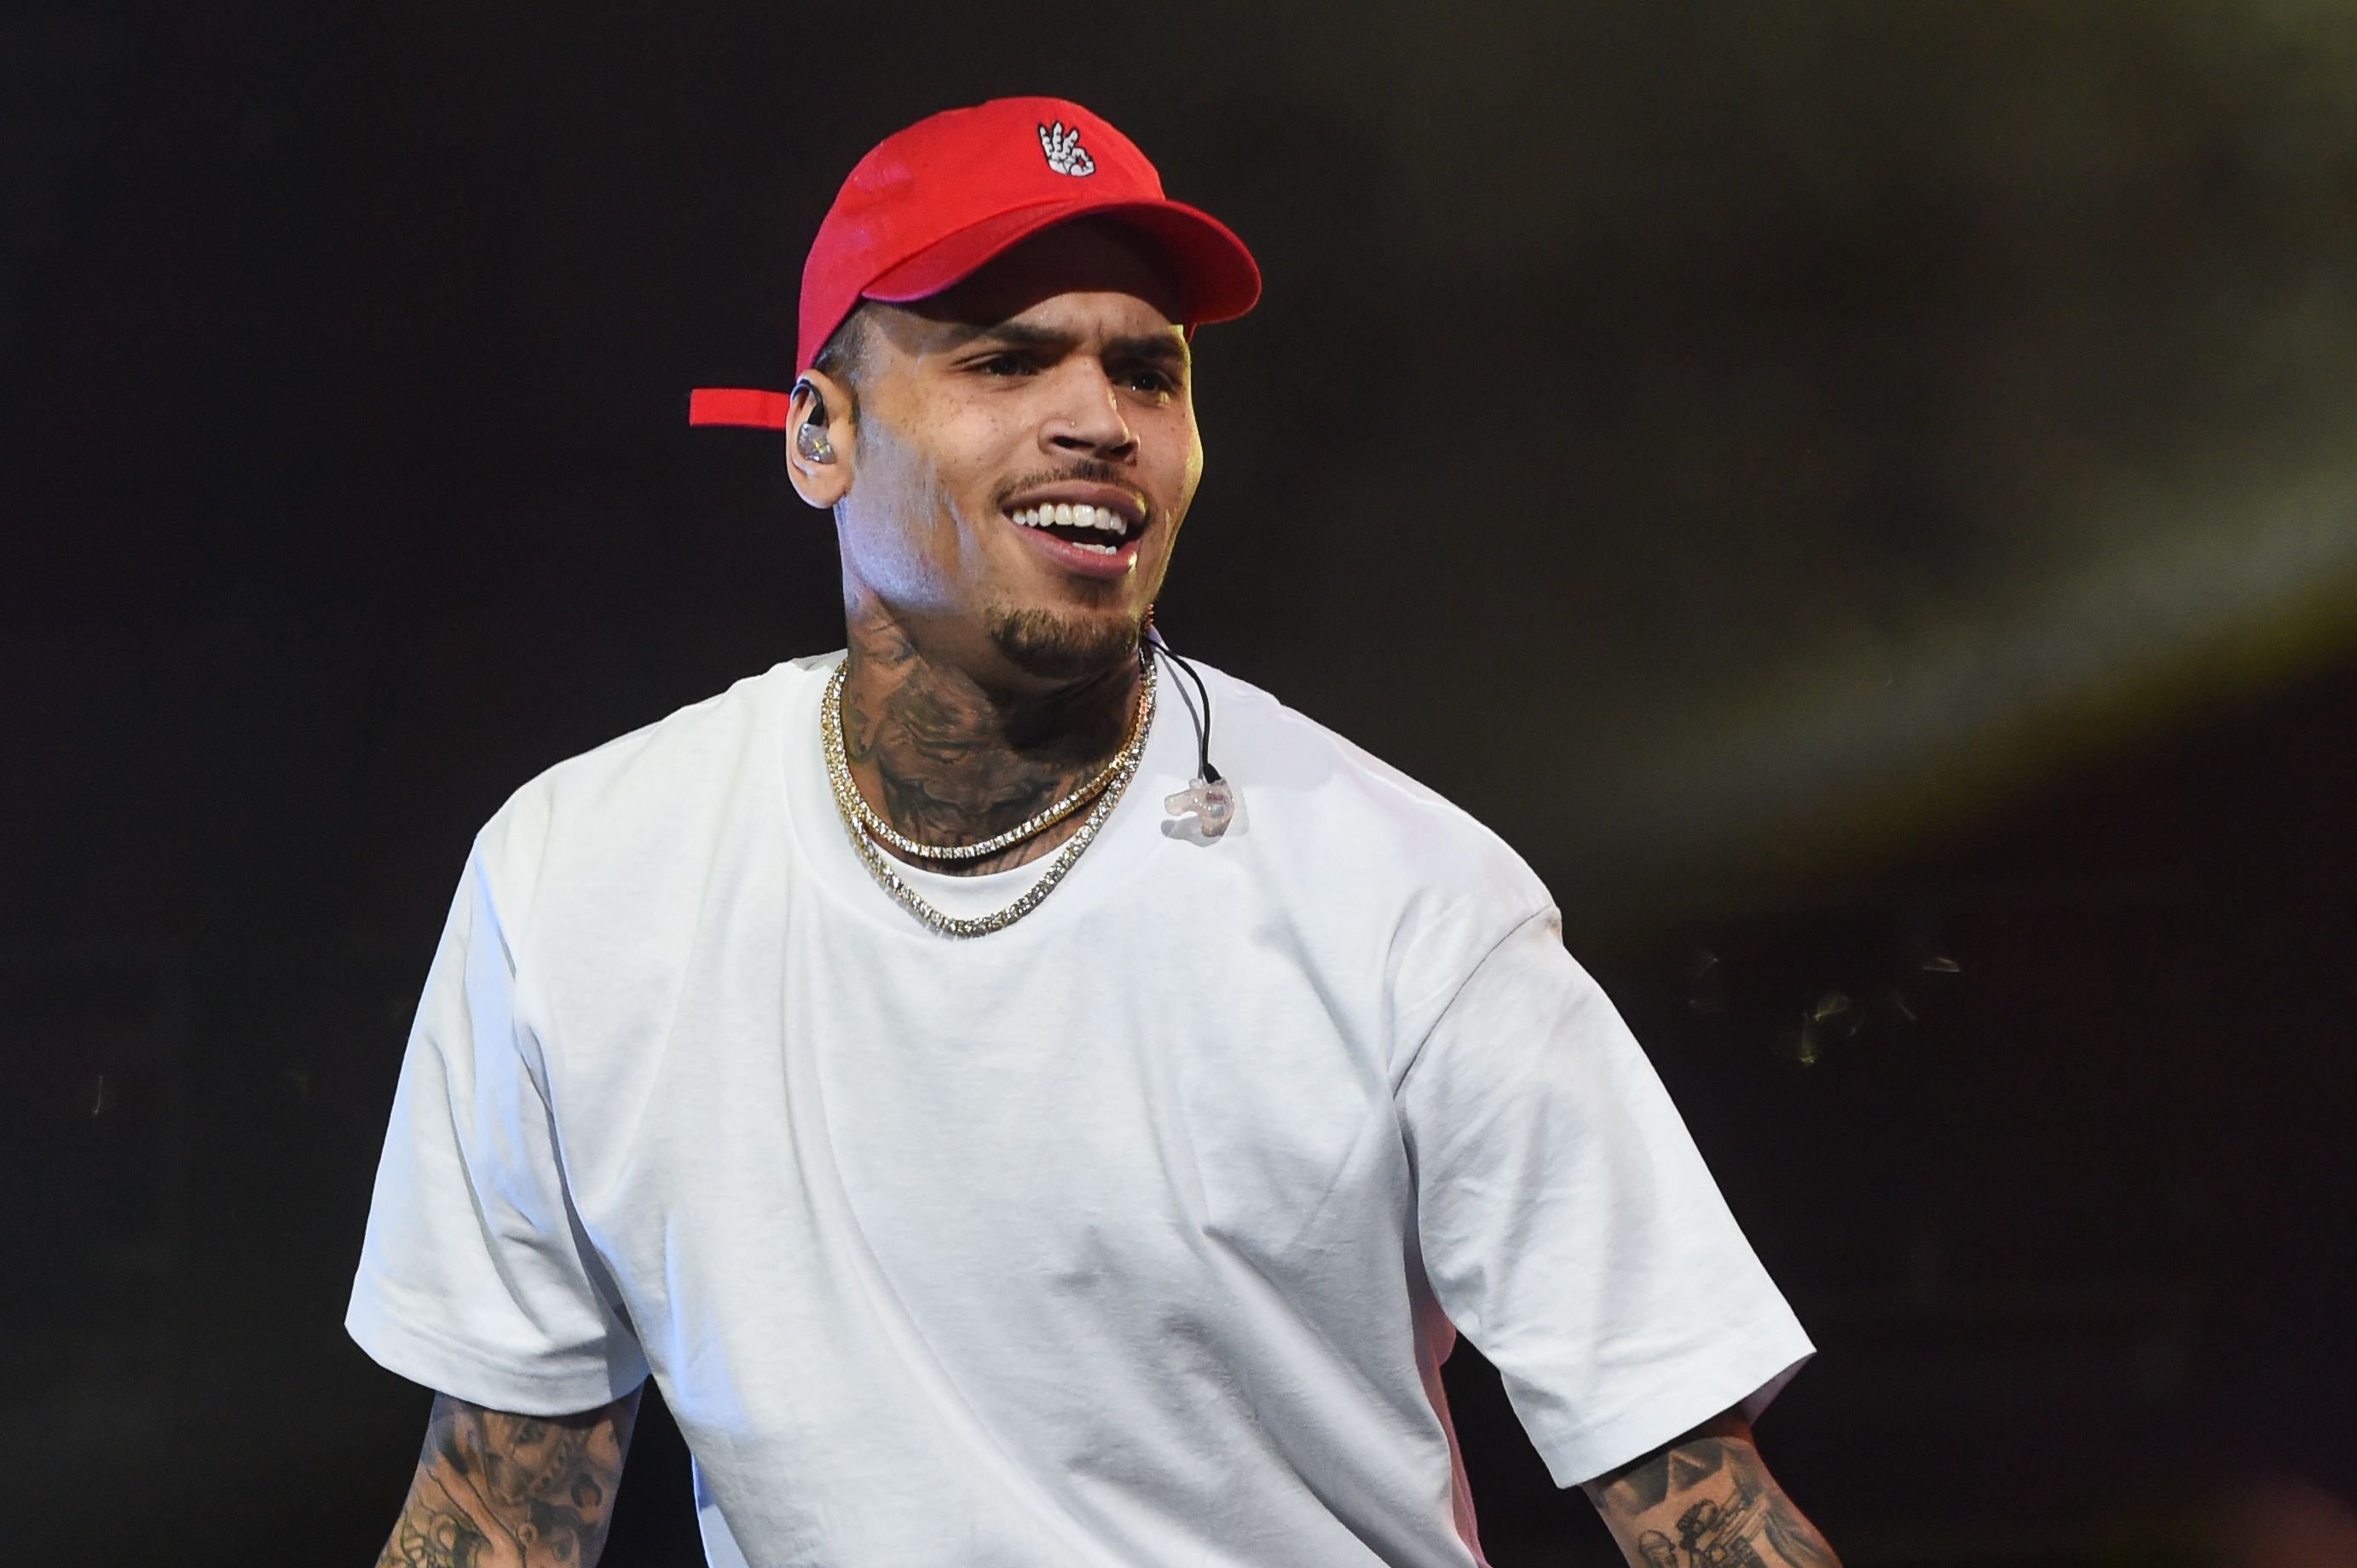 Singer Chris Brown performs at The Big Show at Little Caesars Arena on December 28, 2017 in Detroit, Michigan | Photo: Getty Images